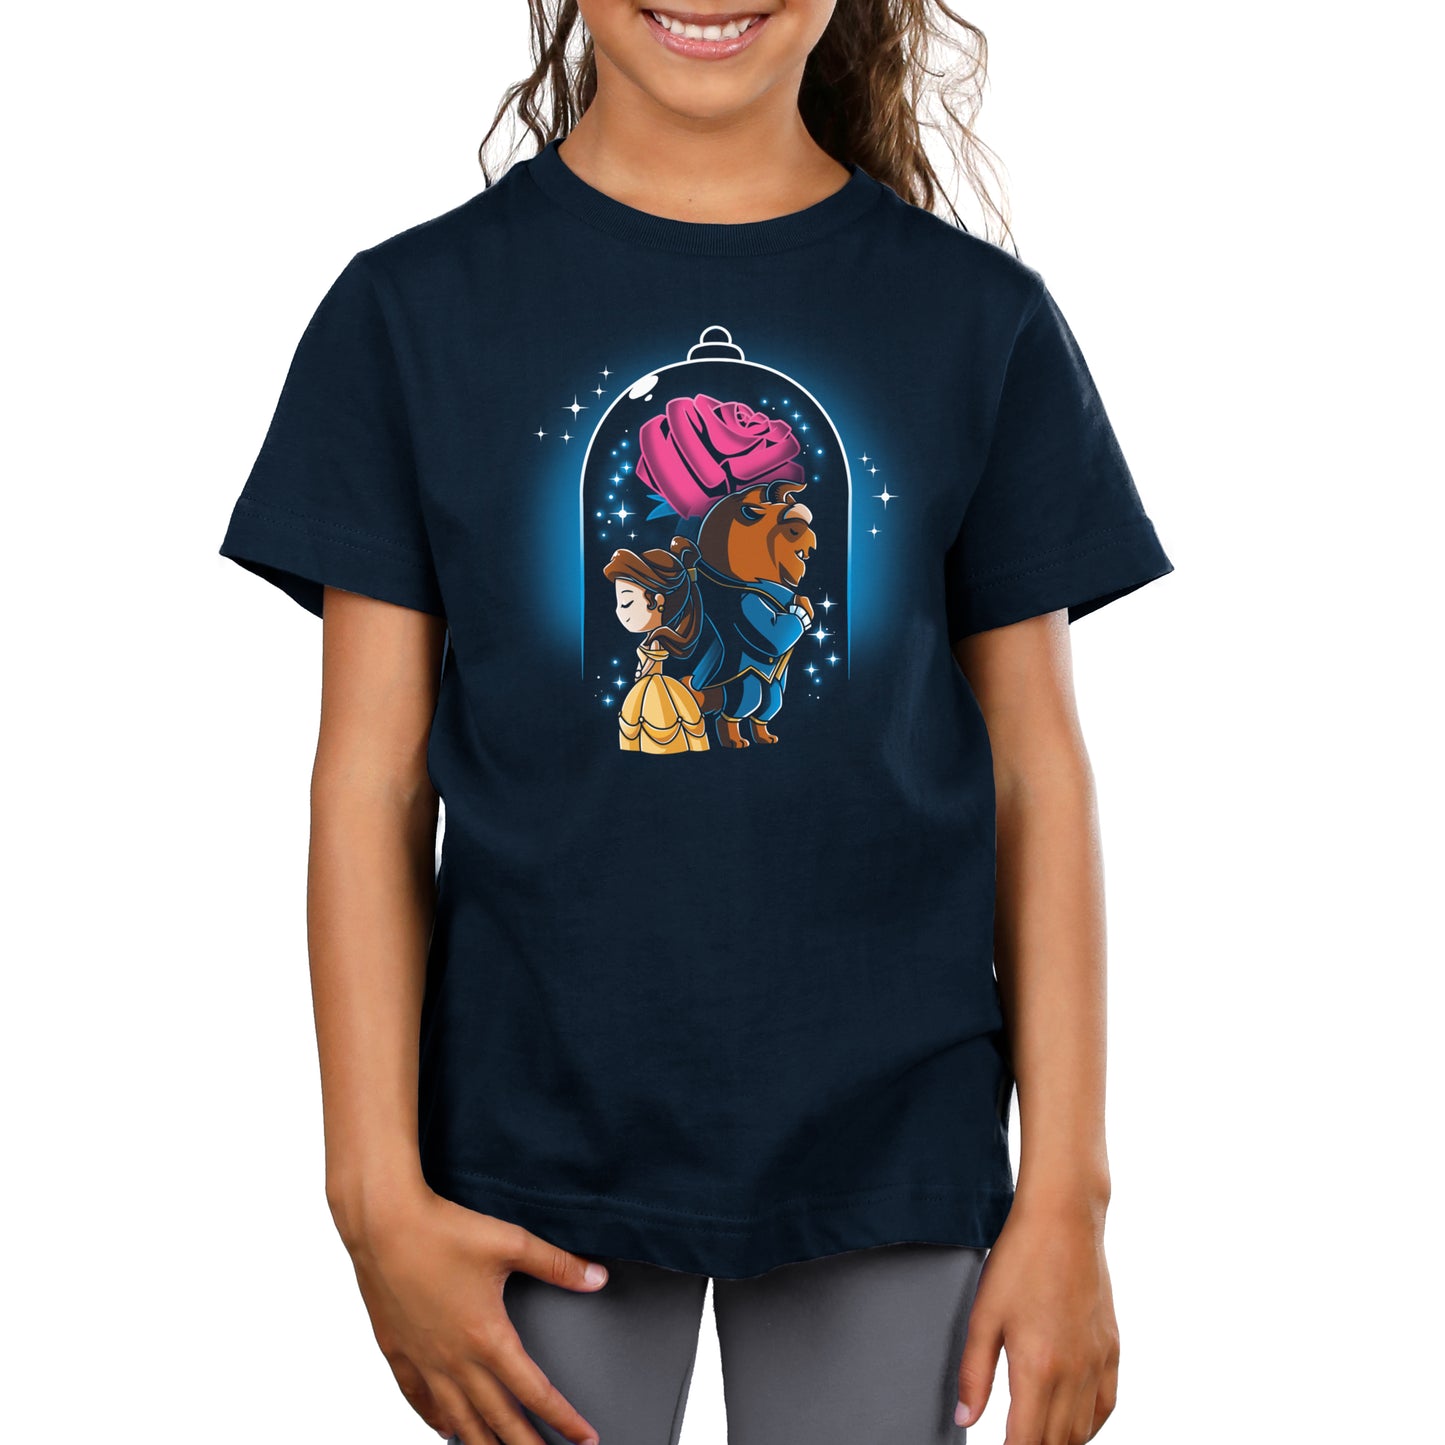 A girl wearing an officially licensed Disney Beauty and The Beast t-shirt.